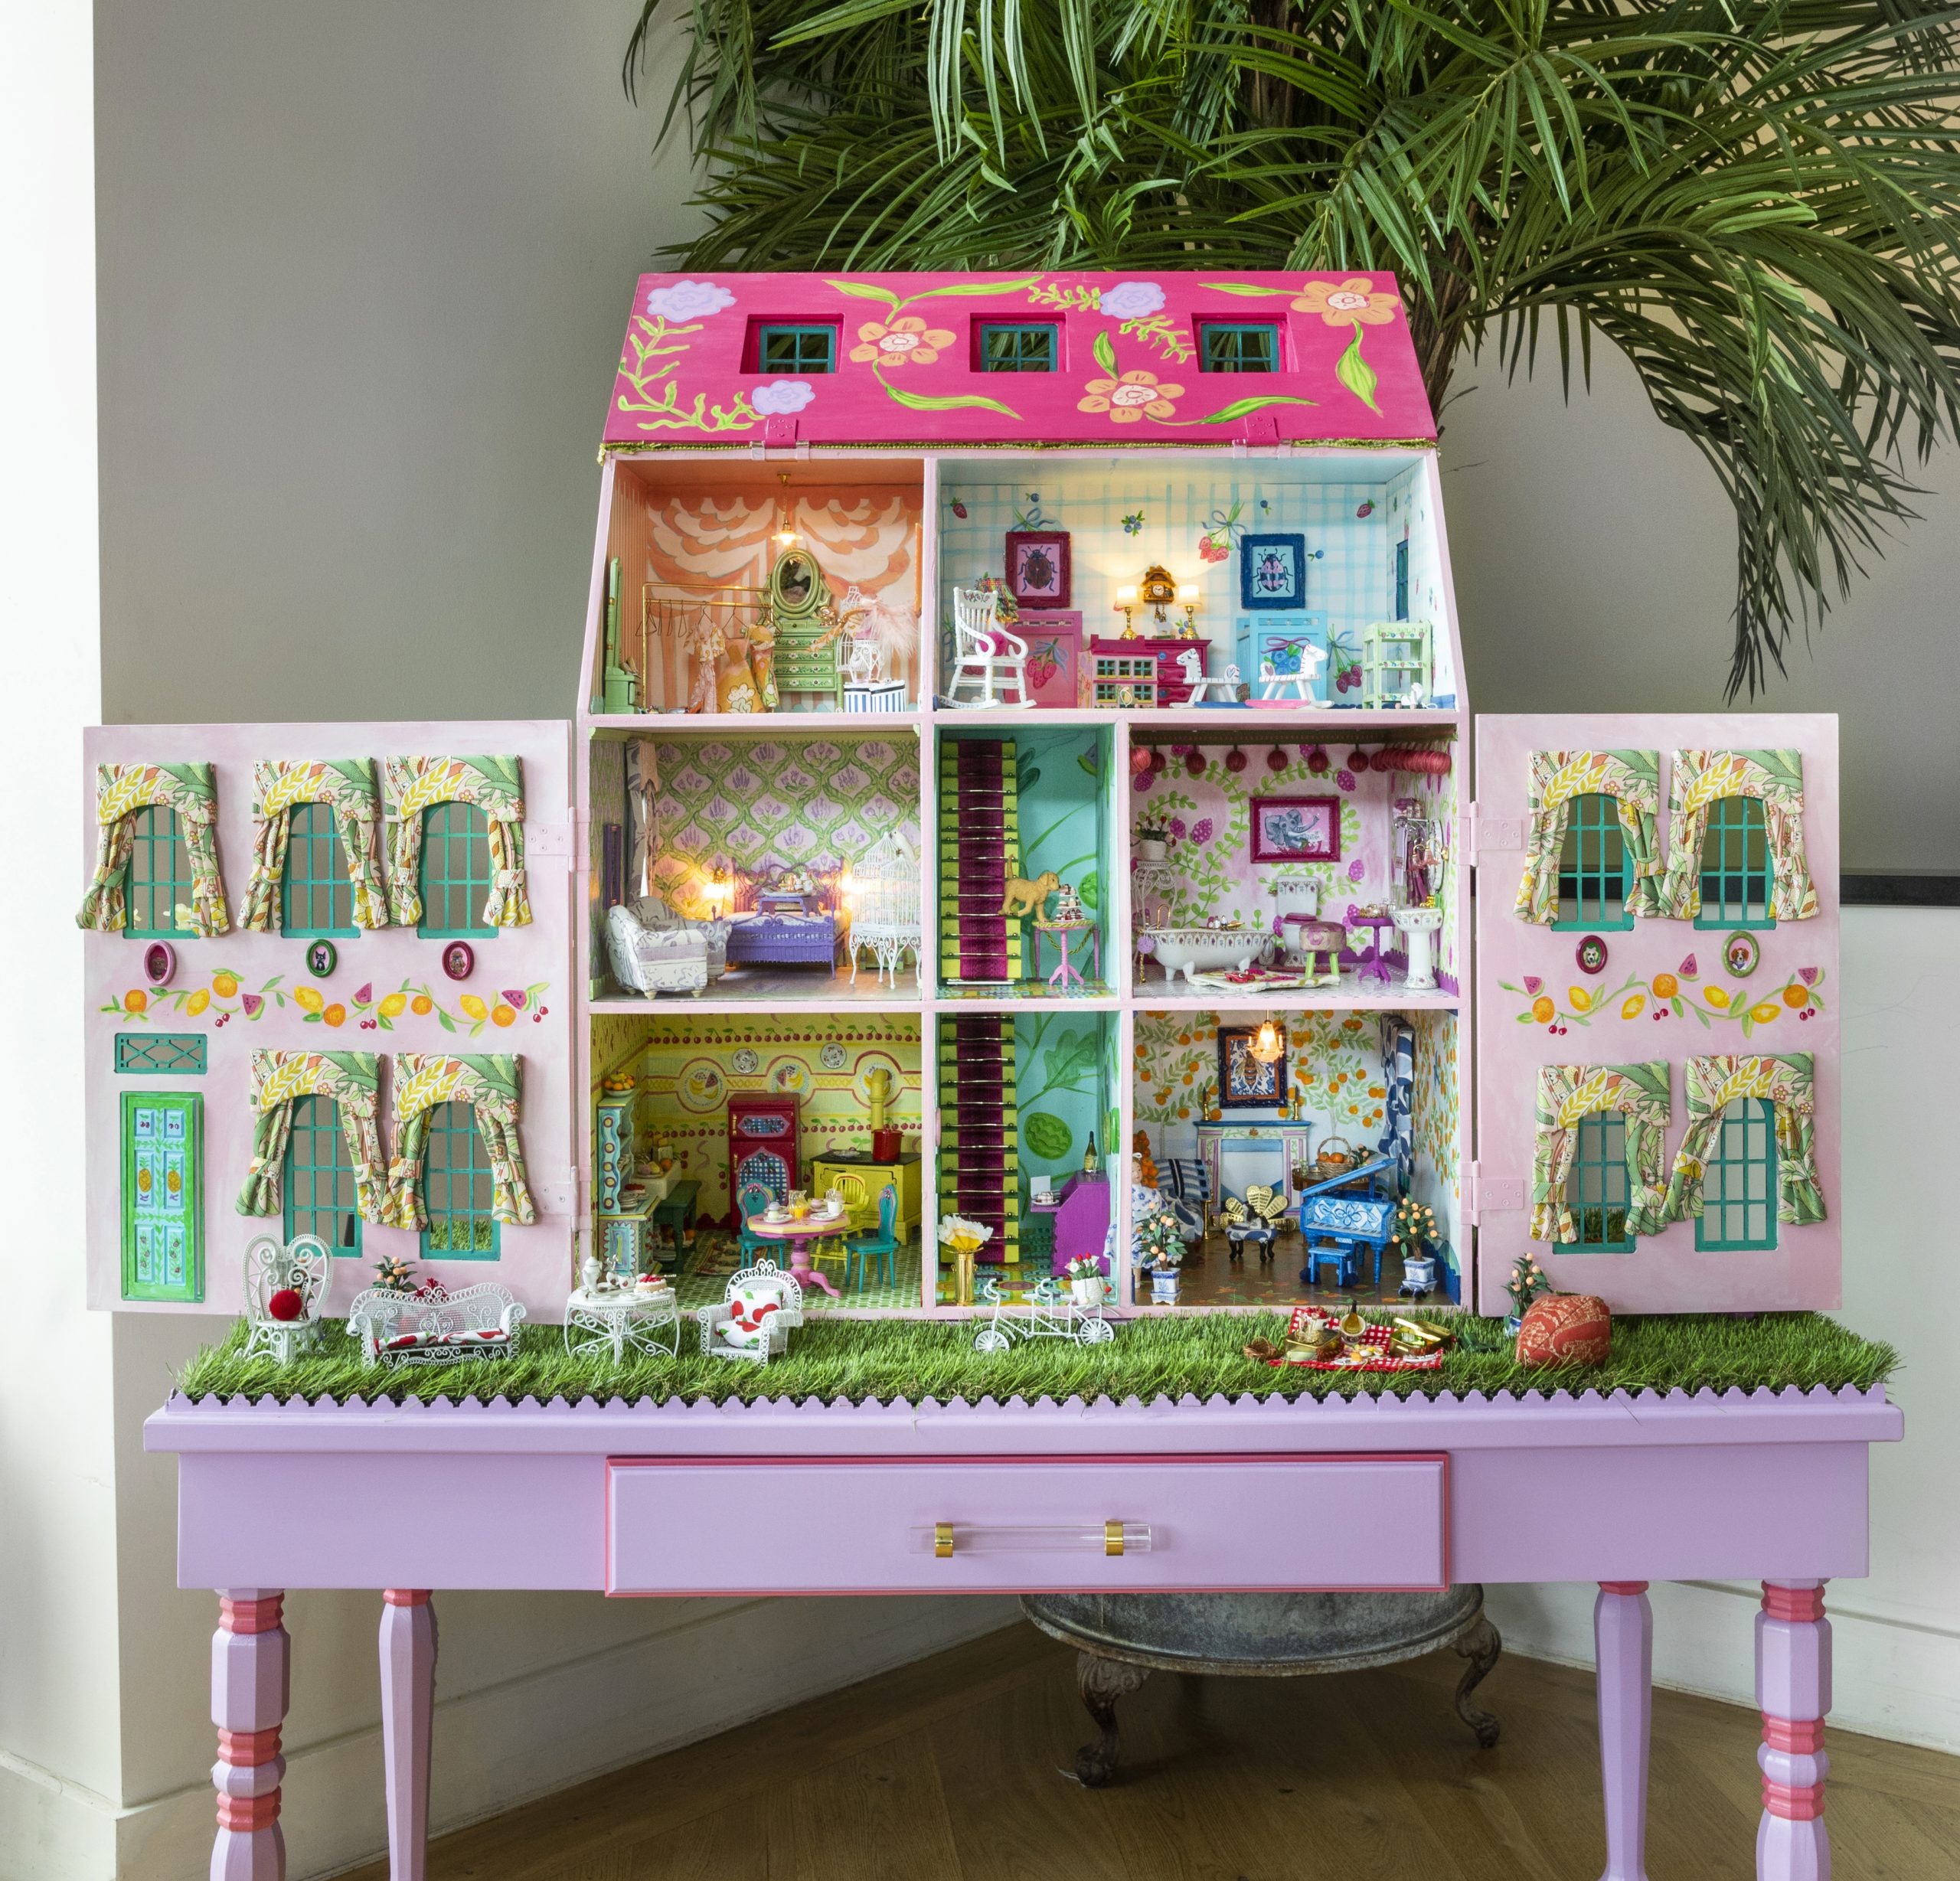 Our “ColorFULL Fruit Salad Cottage” Dollhouse